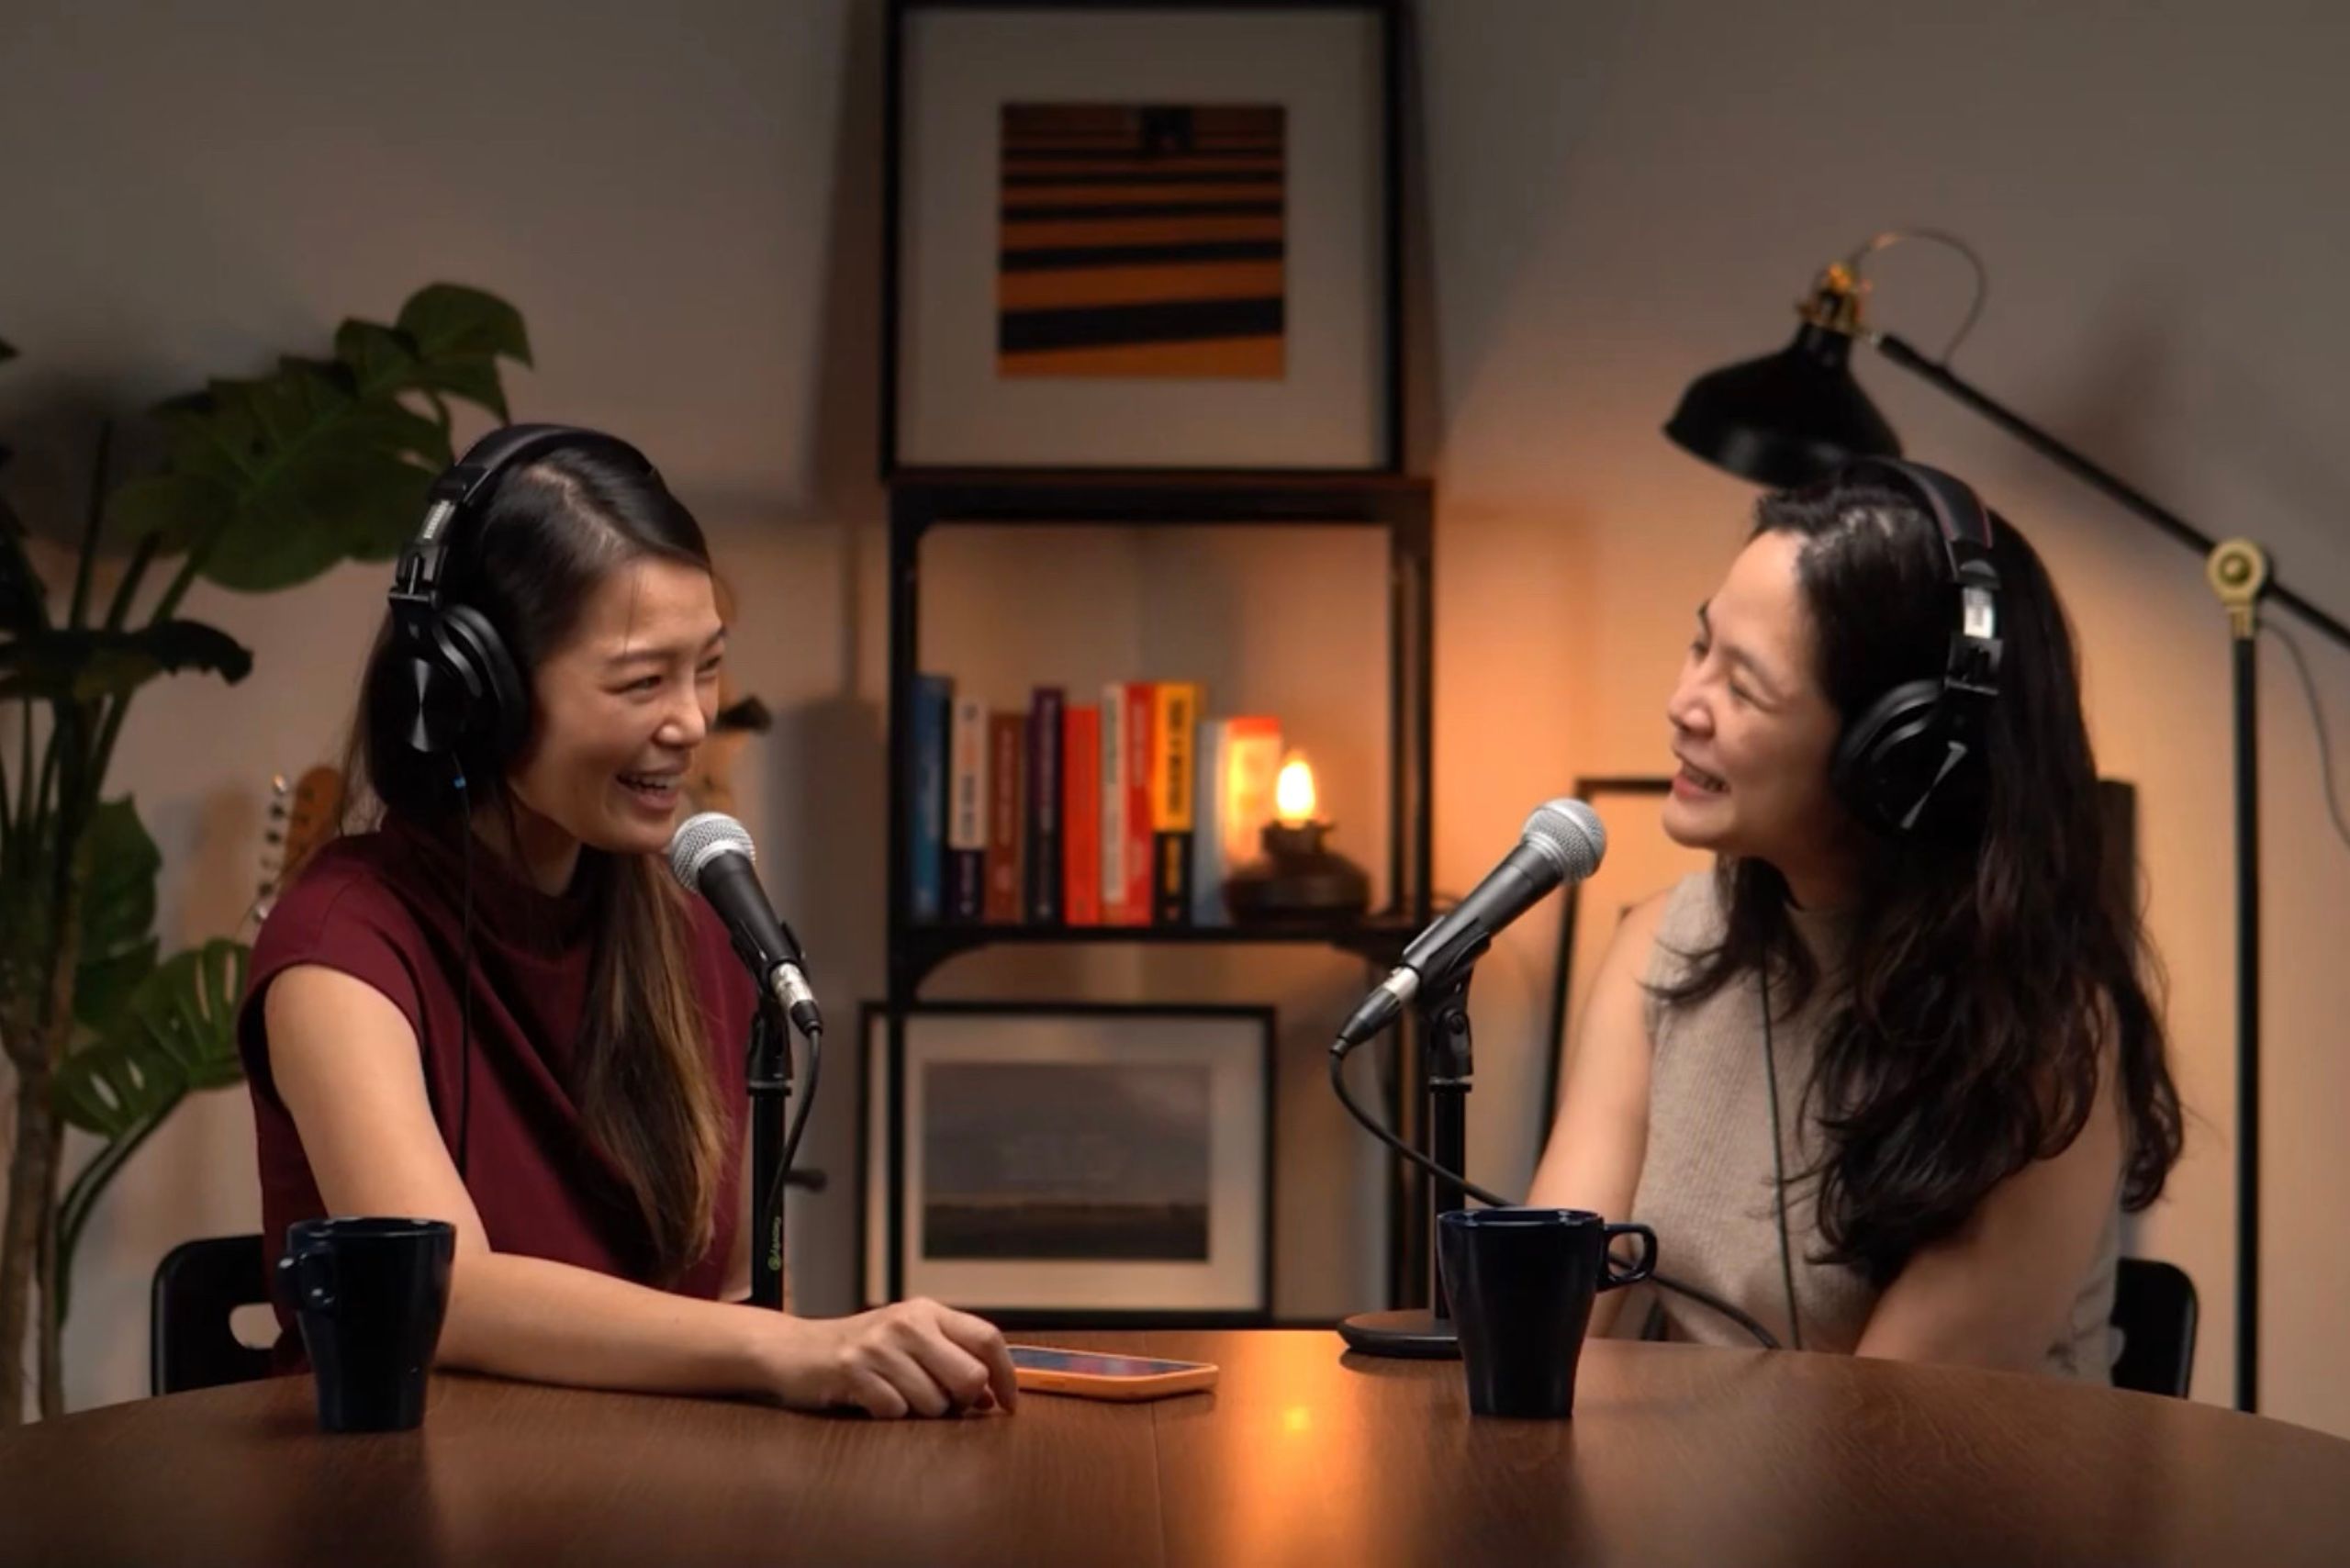 So this is my why podcast milestone - featuring guest host artist Red Hong Yi interviewing me, Ling Yah